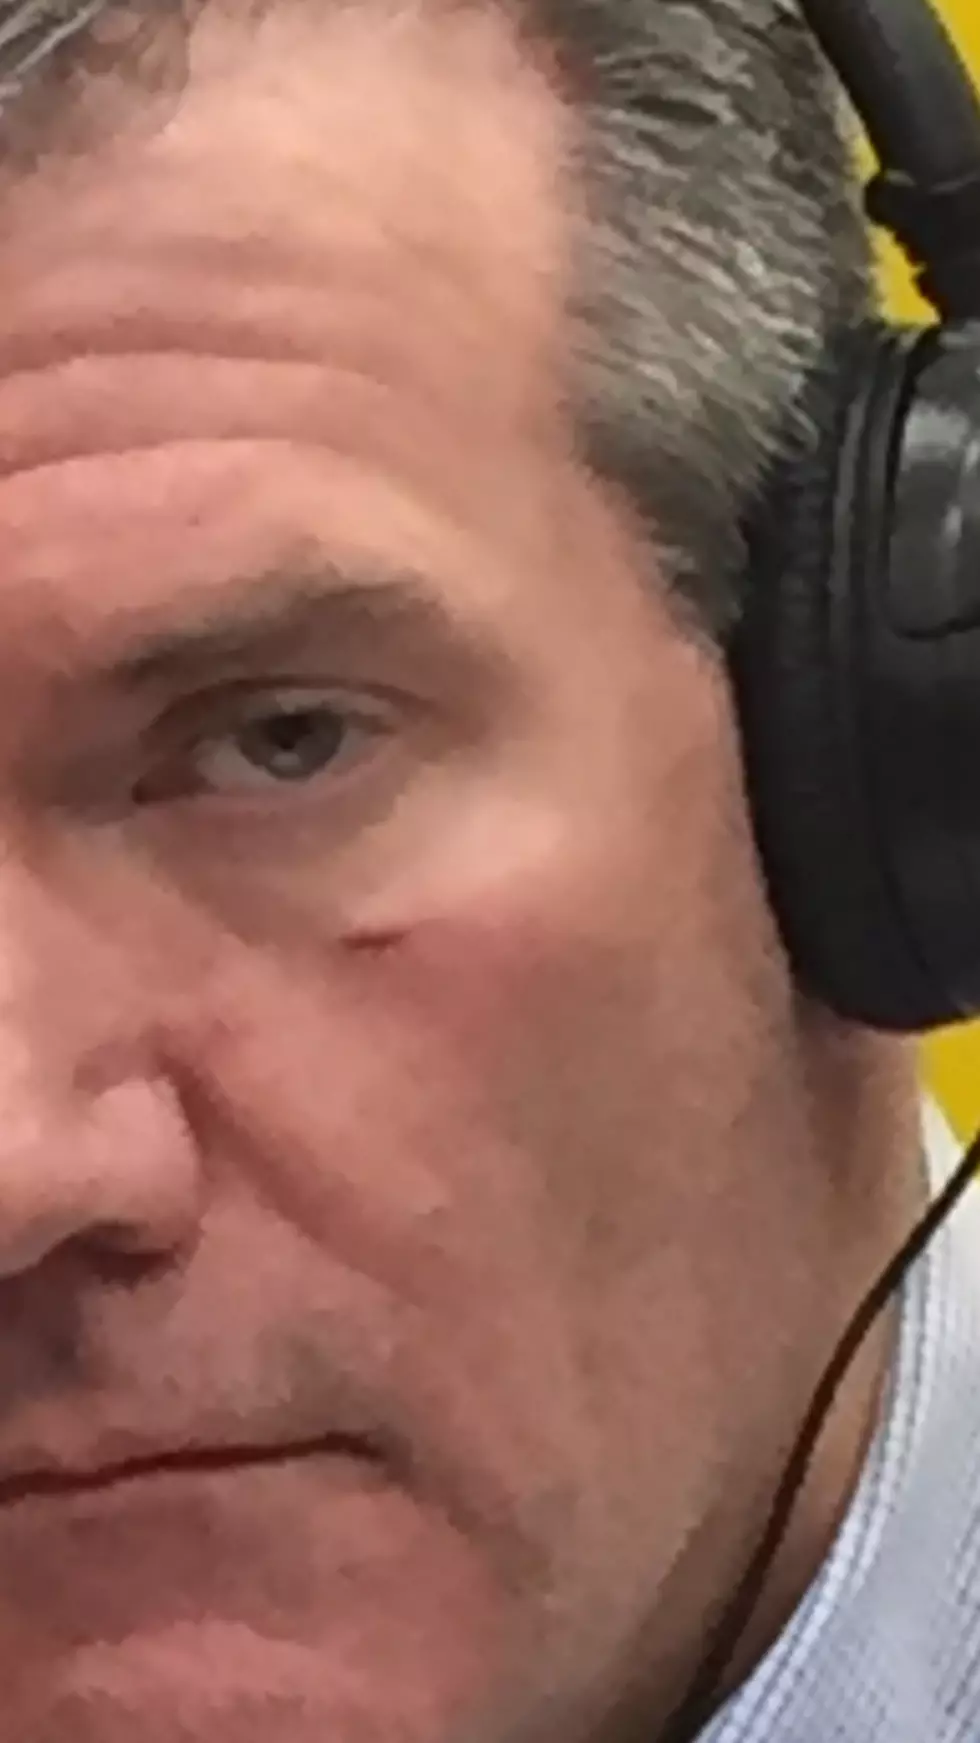 Here is the result of Bill Doyle&#8217;s dumb injury (Photo)